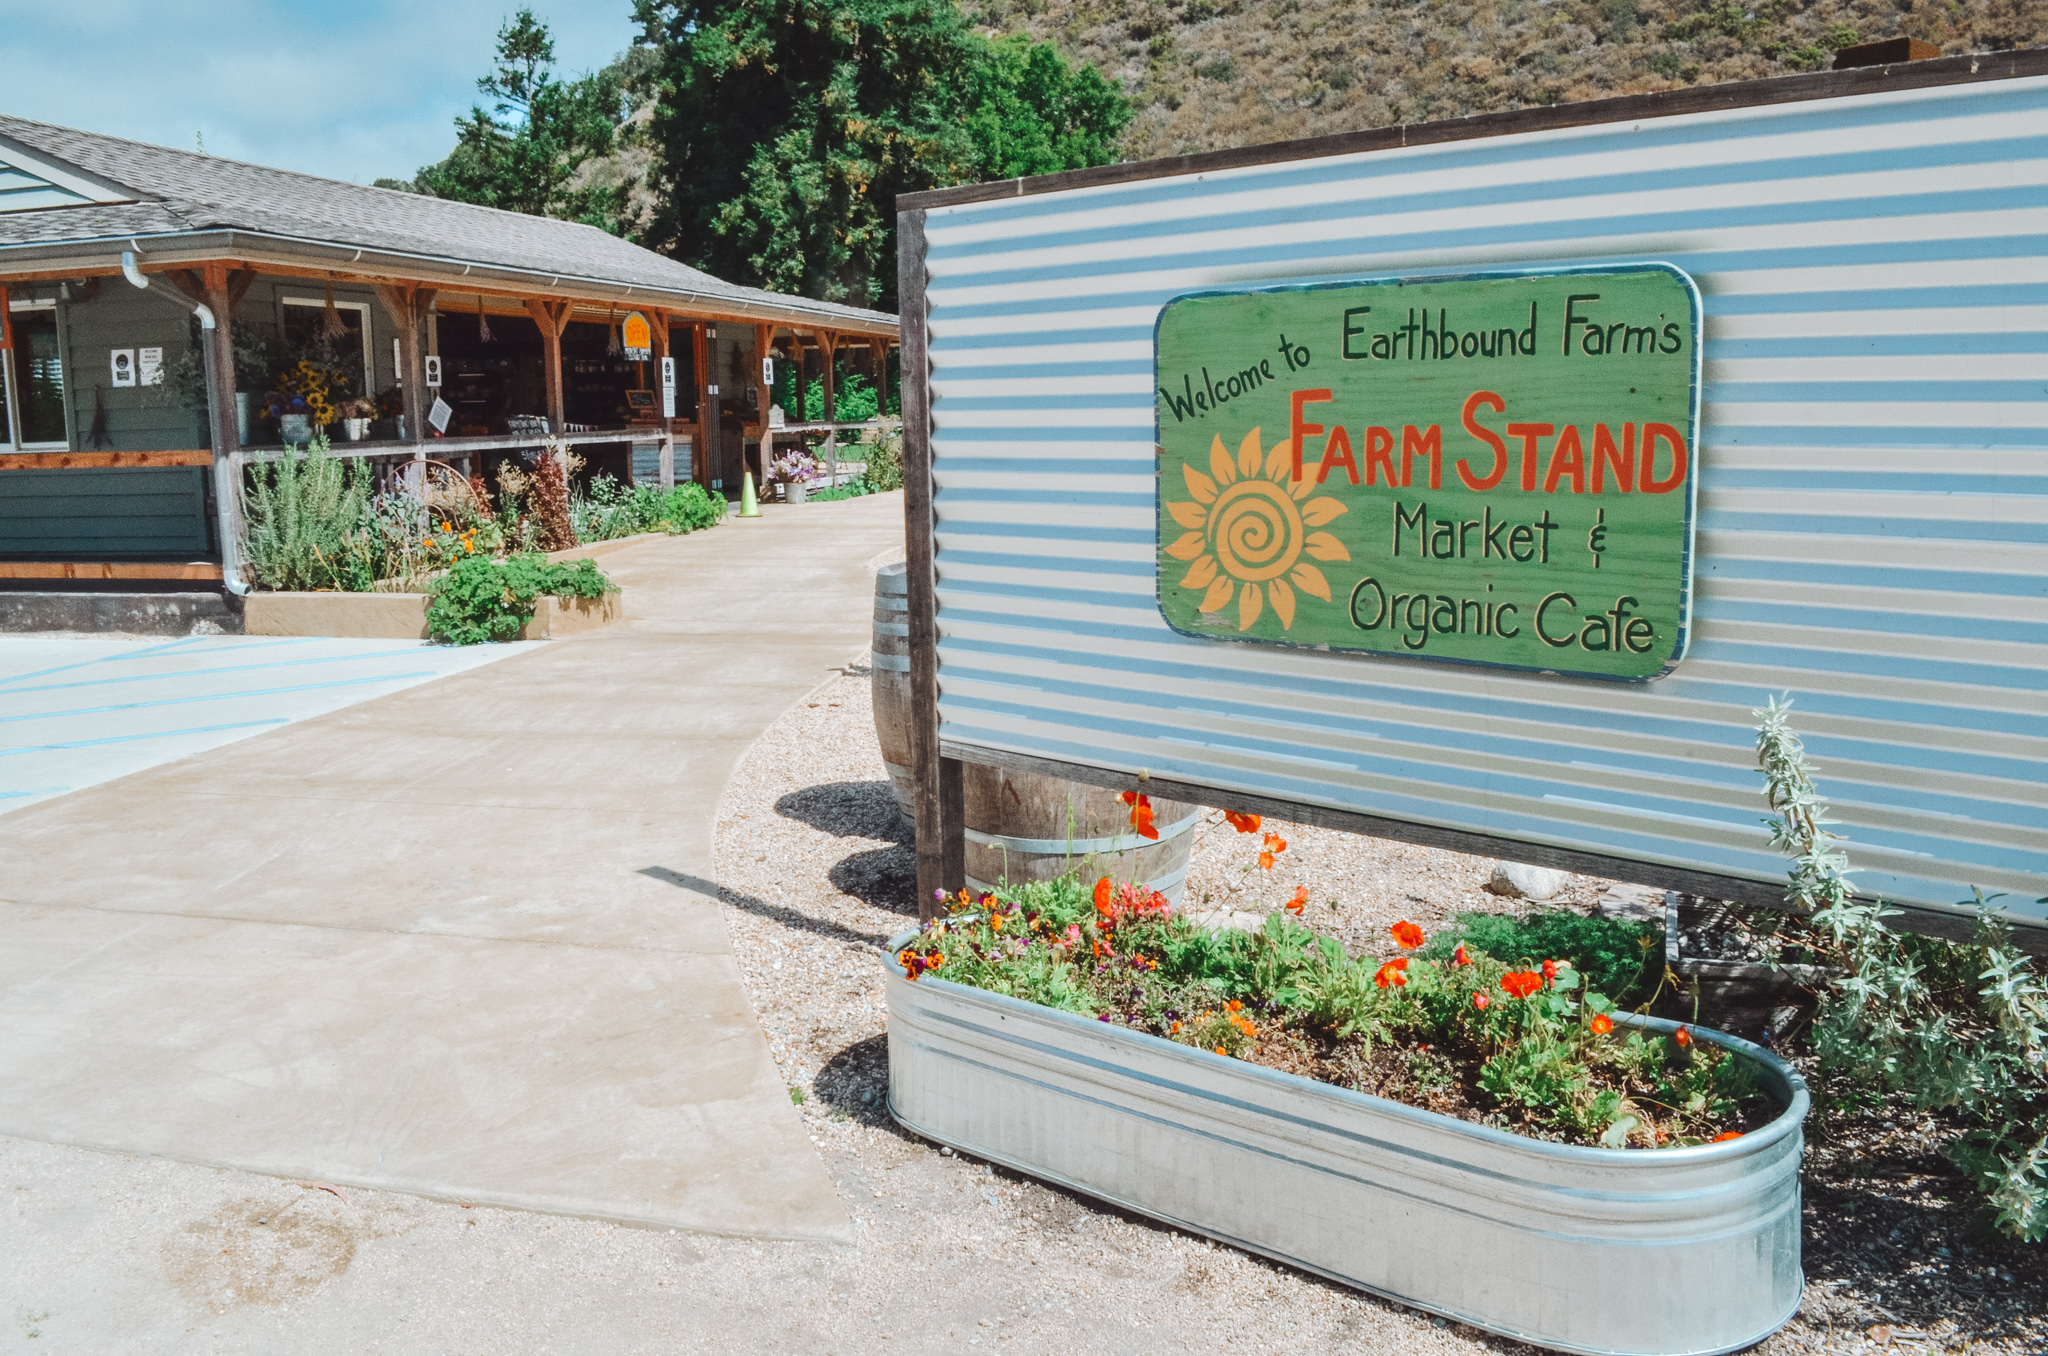 Entrance at Earthbound Farm Farm Stand in Carmel, CA - market and organic cafe